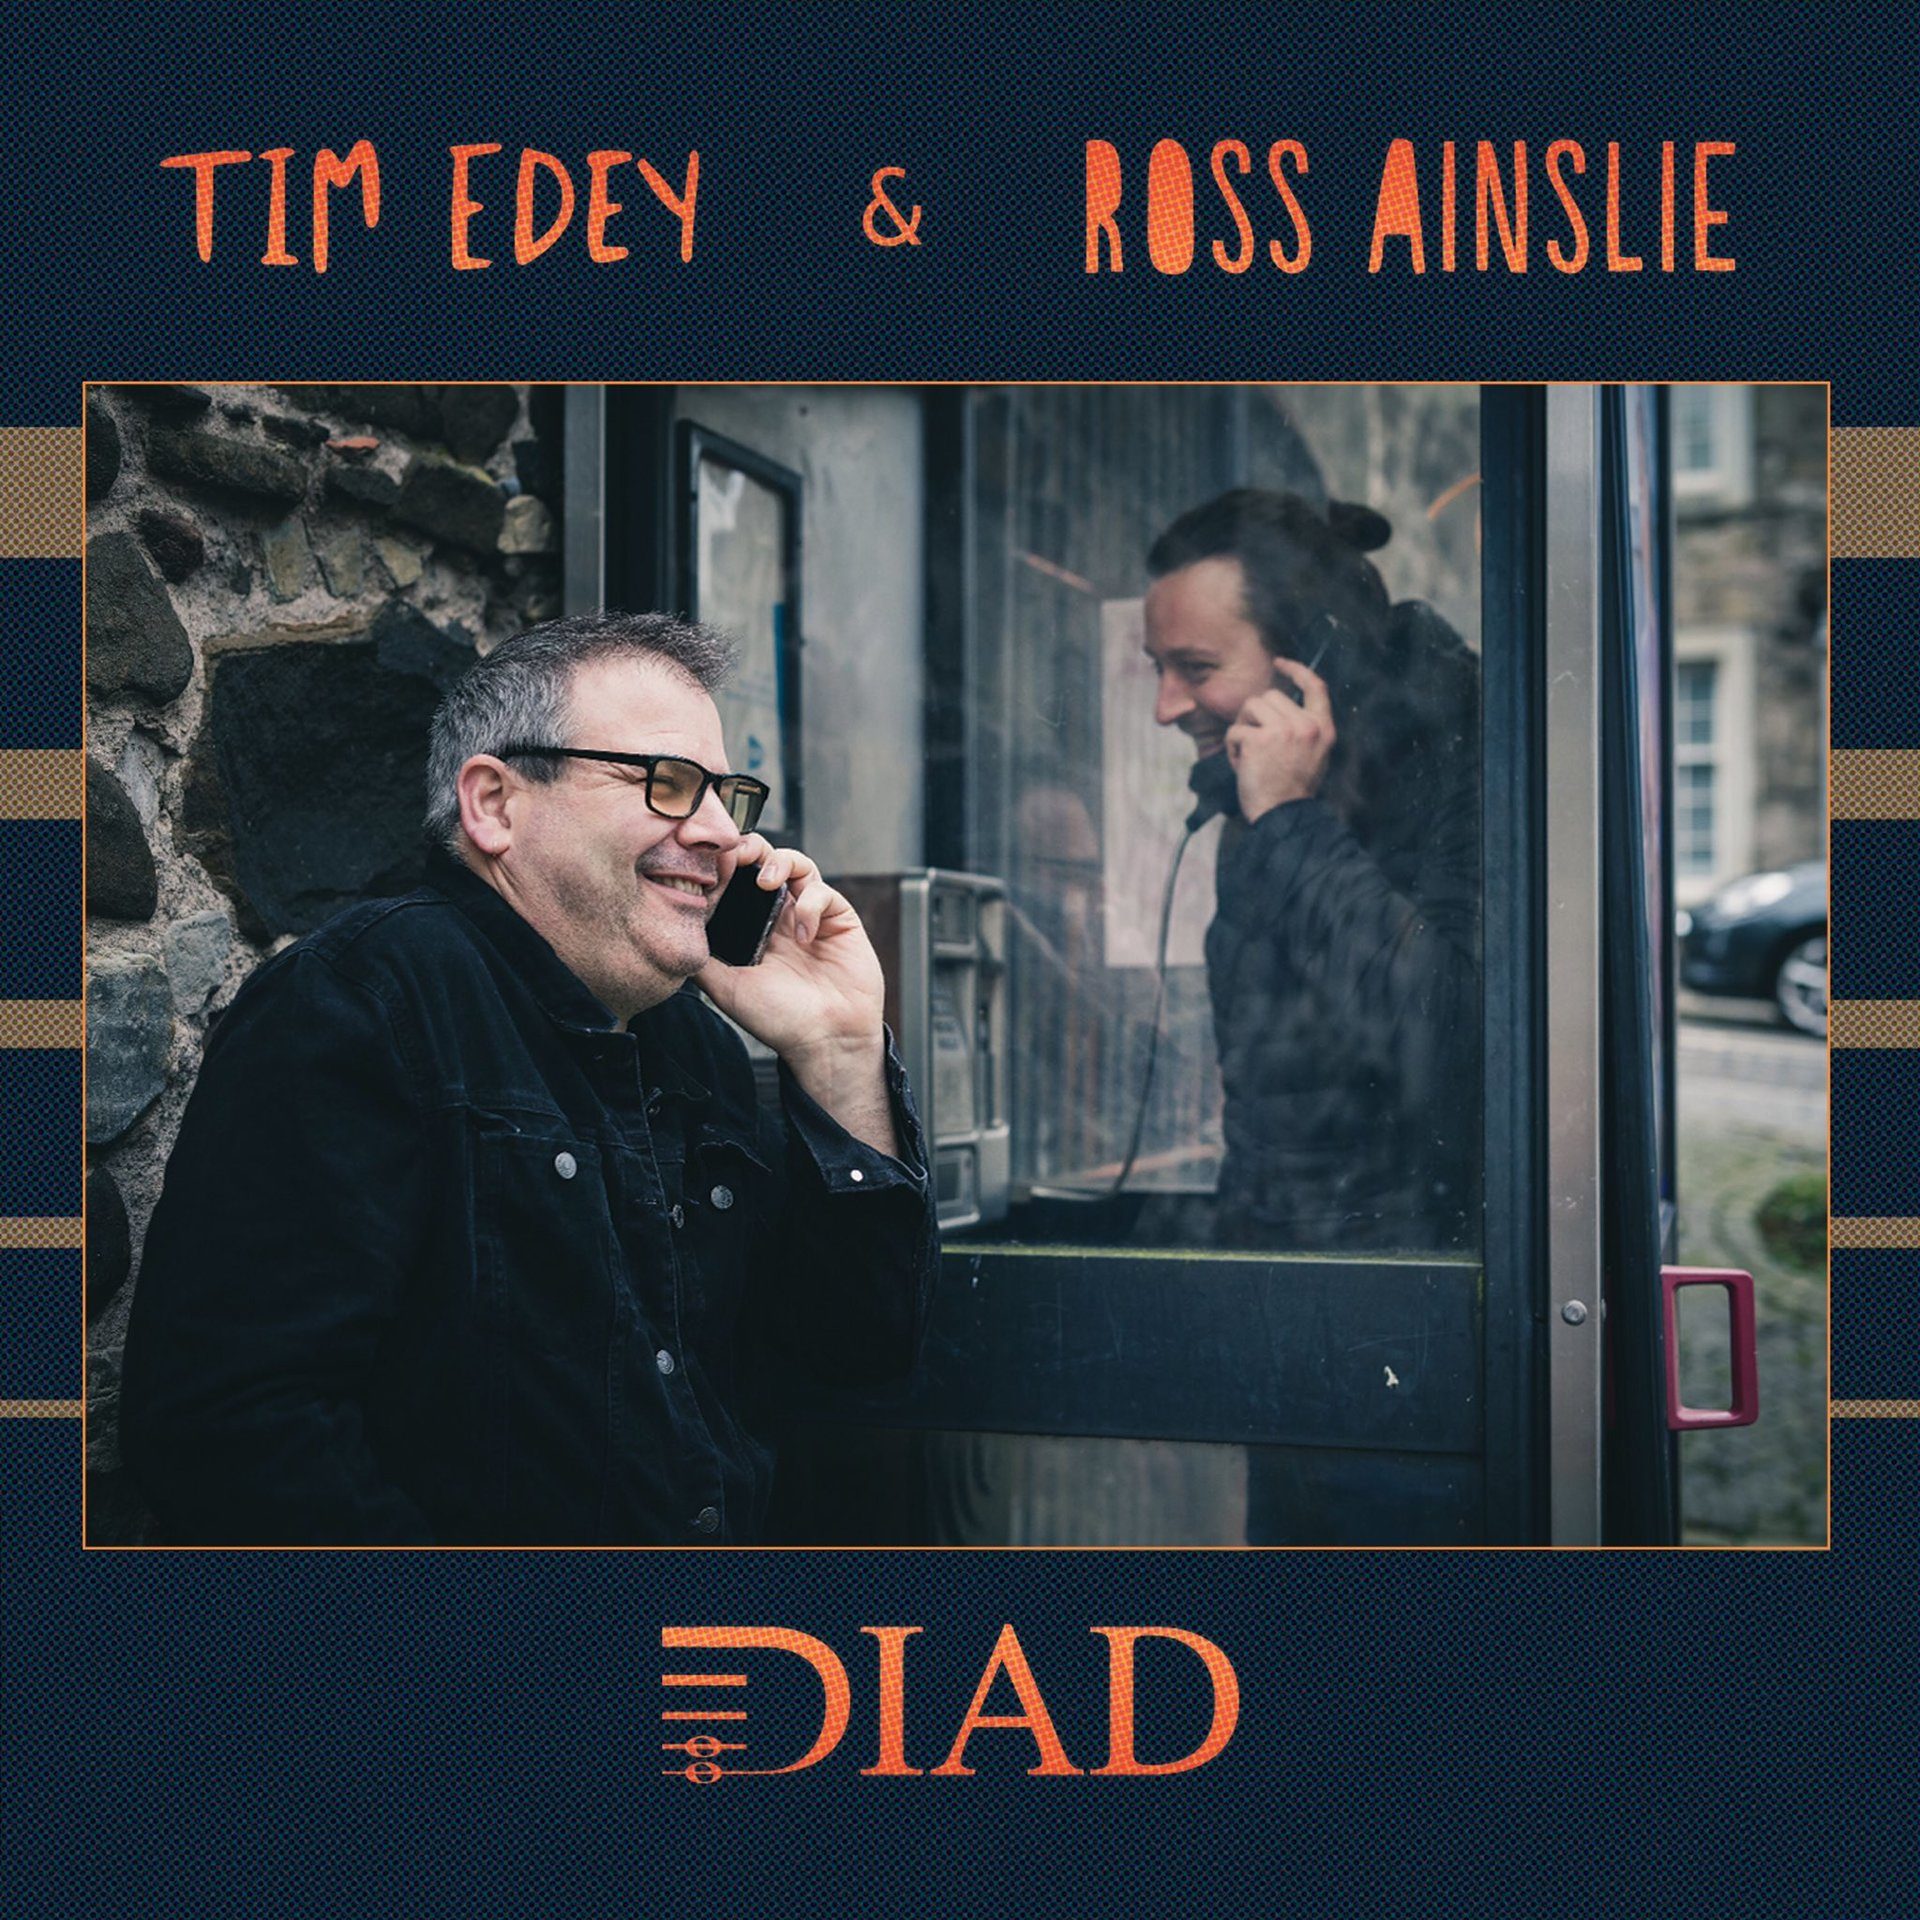 Ross Ainslie's upcoming album, DIAD, in collaboration with musician Tim Edey comes out on March 25, 2023.